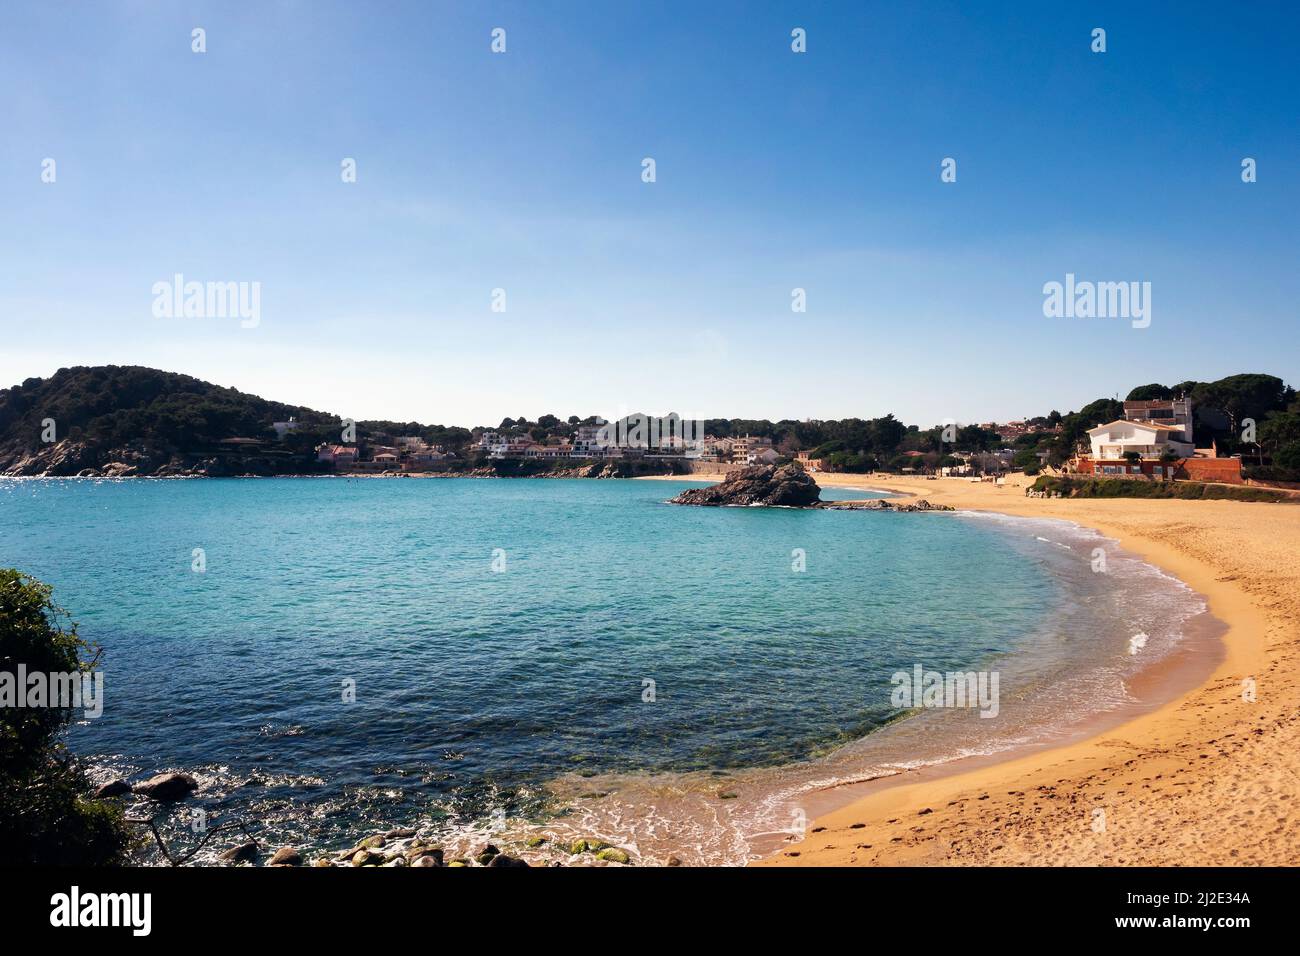 Cala La Fosca beach in Palamos on the Costa Brava in Girona, concept of nature and seafaring lifestyle Stock Photo